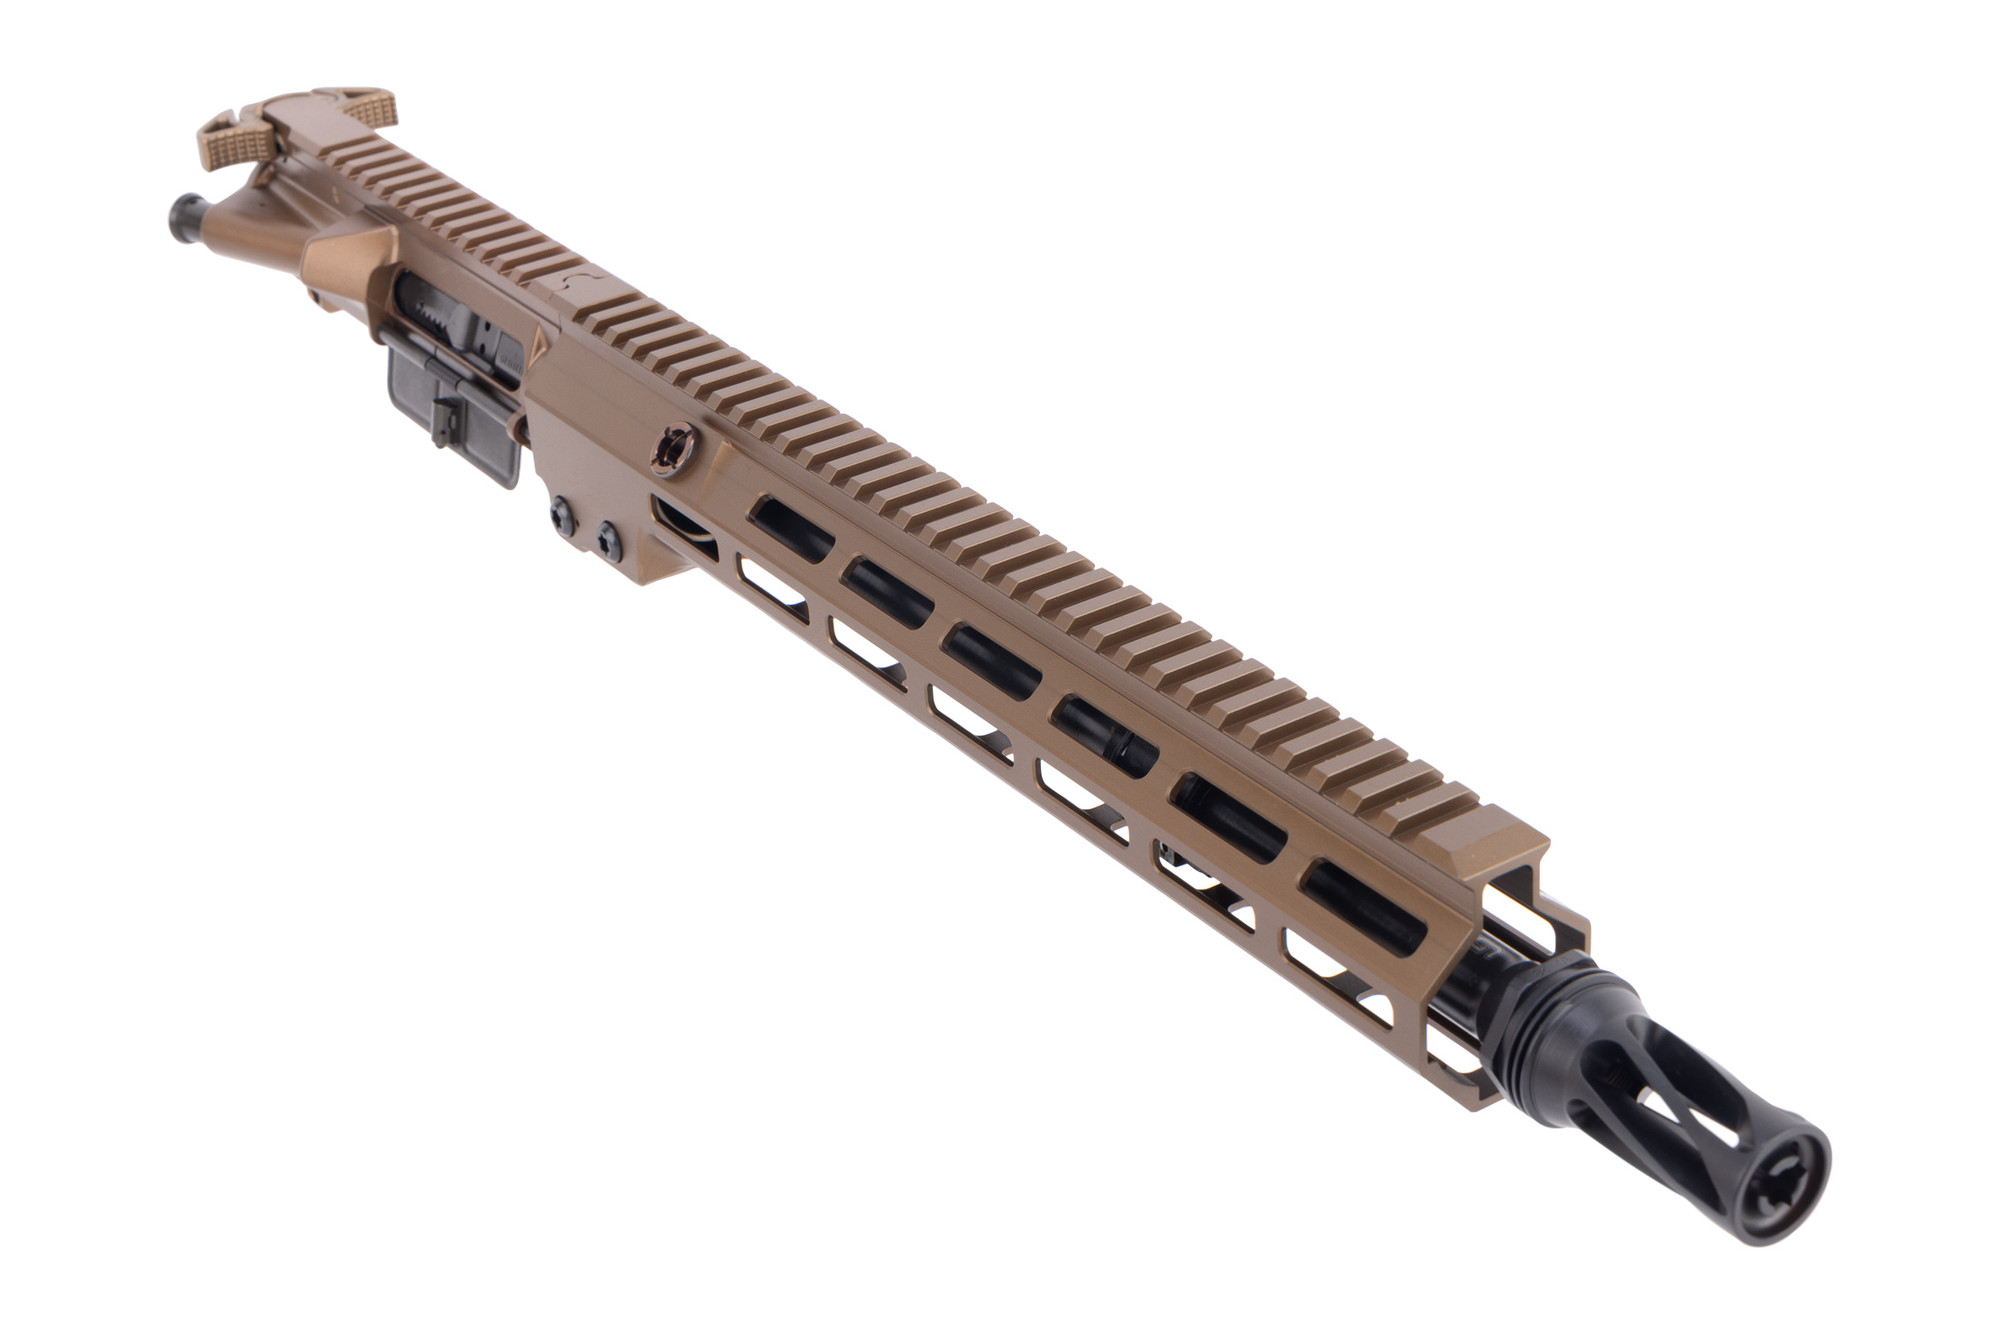 Geissele Super Duty MOD1 5.56 NATO Complete Upper Receiver - 14.5 Pinned - DDC